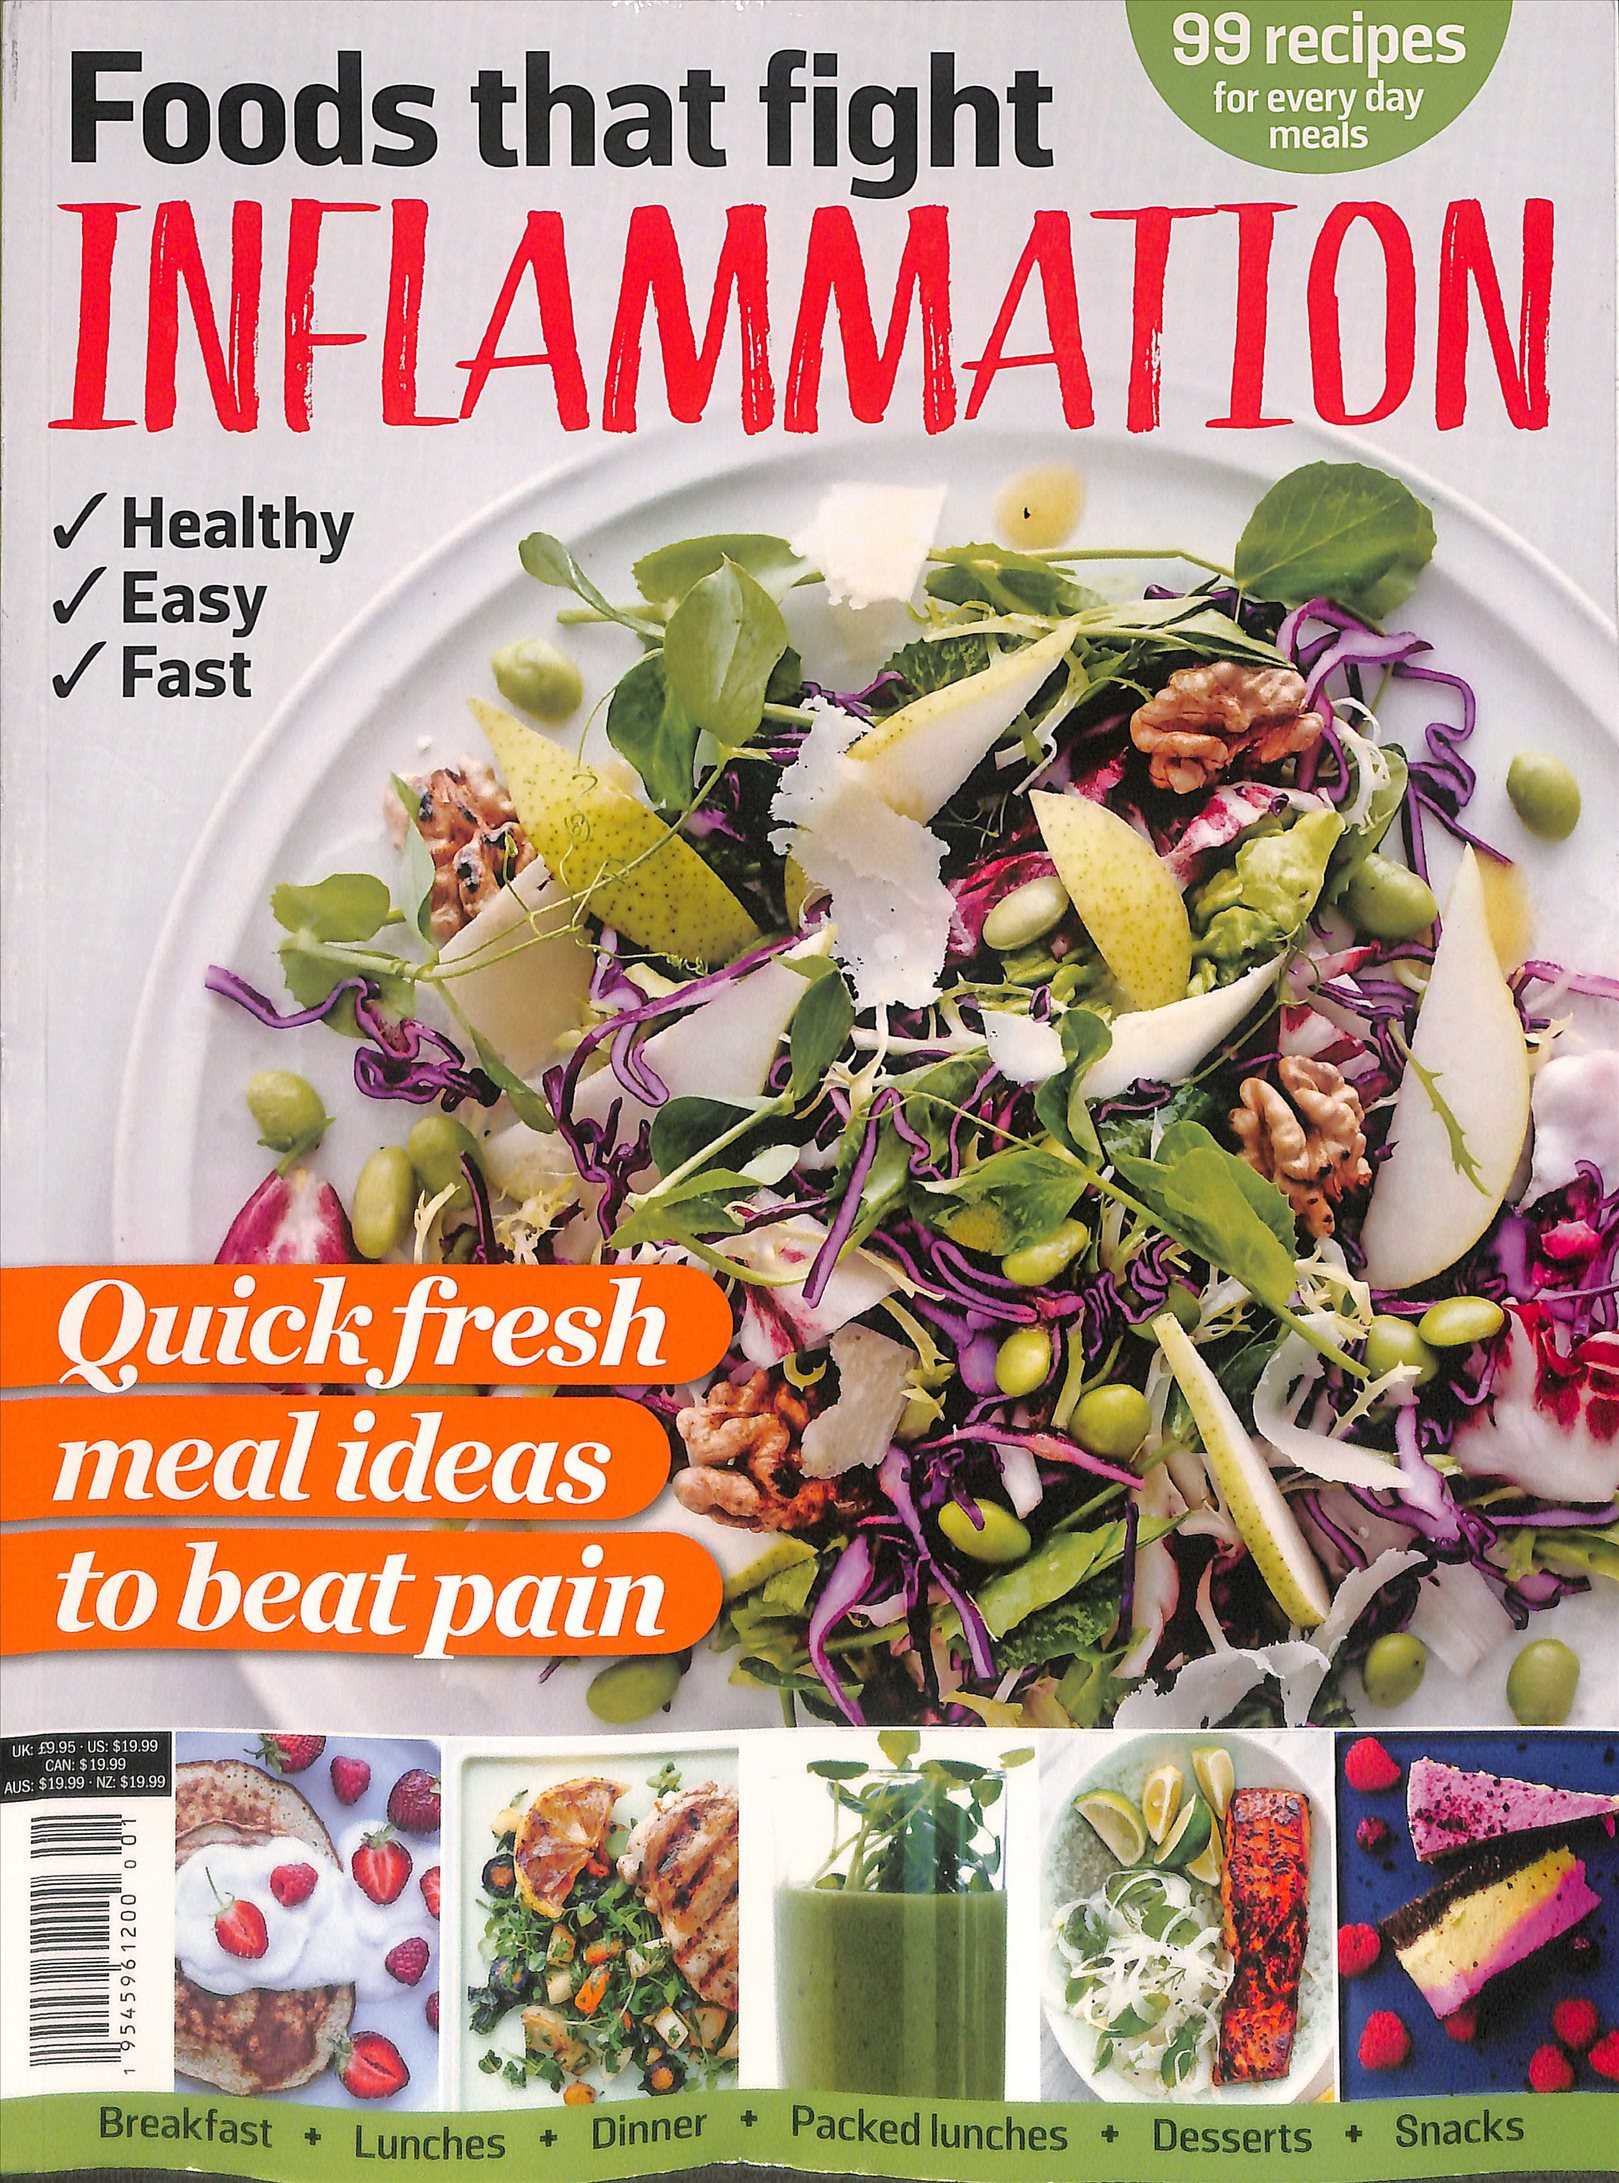 FOODS THAT FIGHT INFLAMMAT